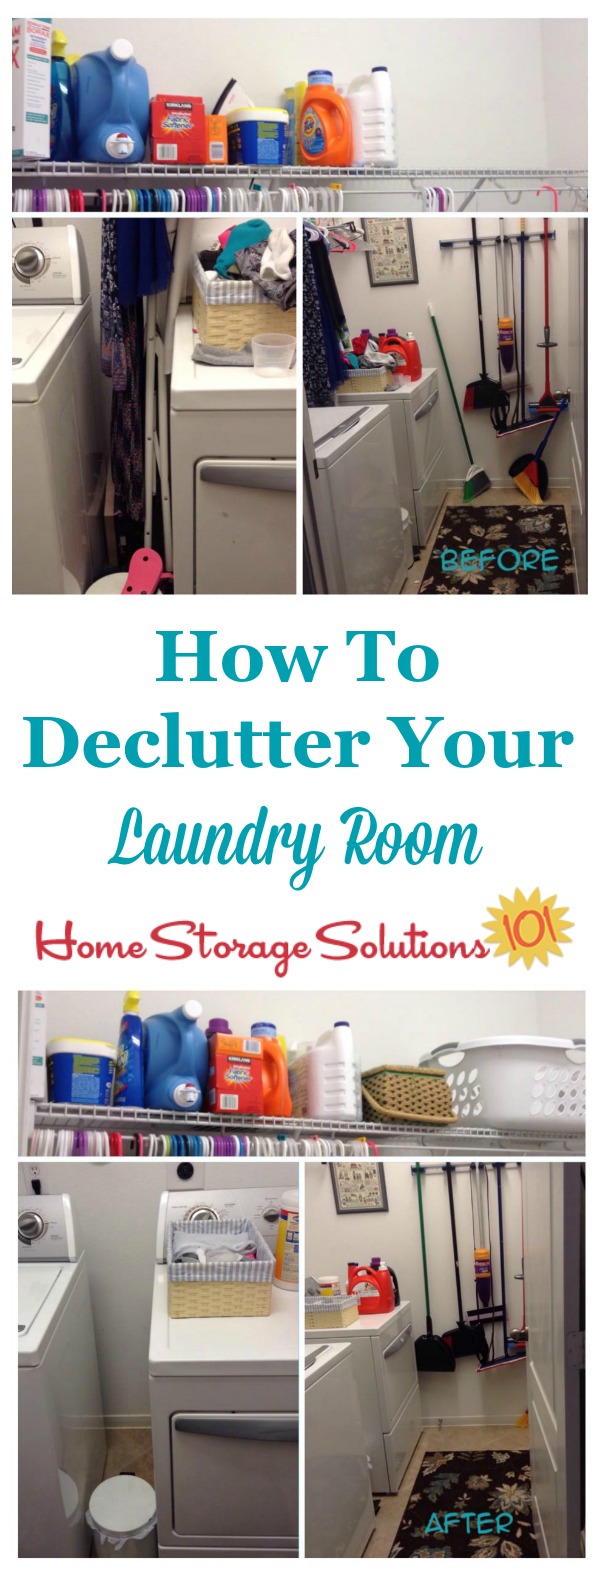 How to declutter your laundry room, with tips and before and after photos from readers who've done this #Declutter365 mission {on Home Storage Solutions 101}